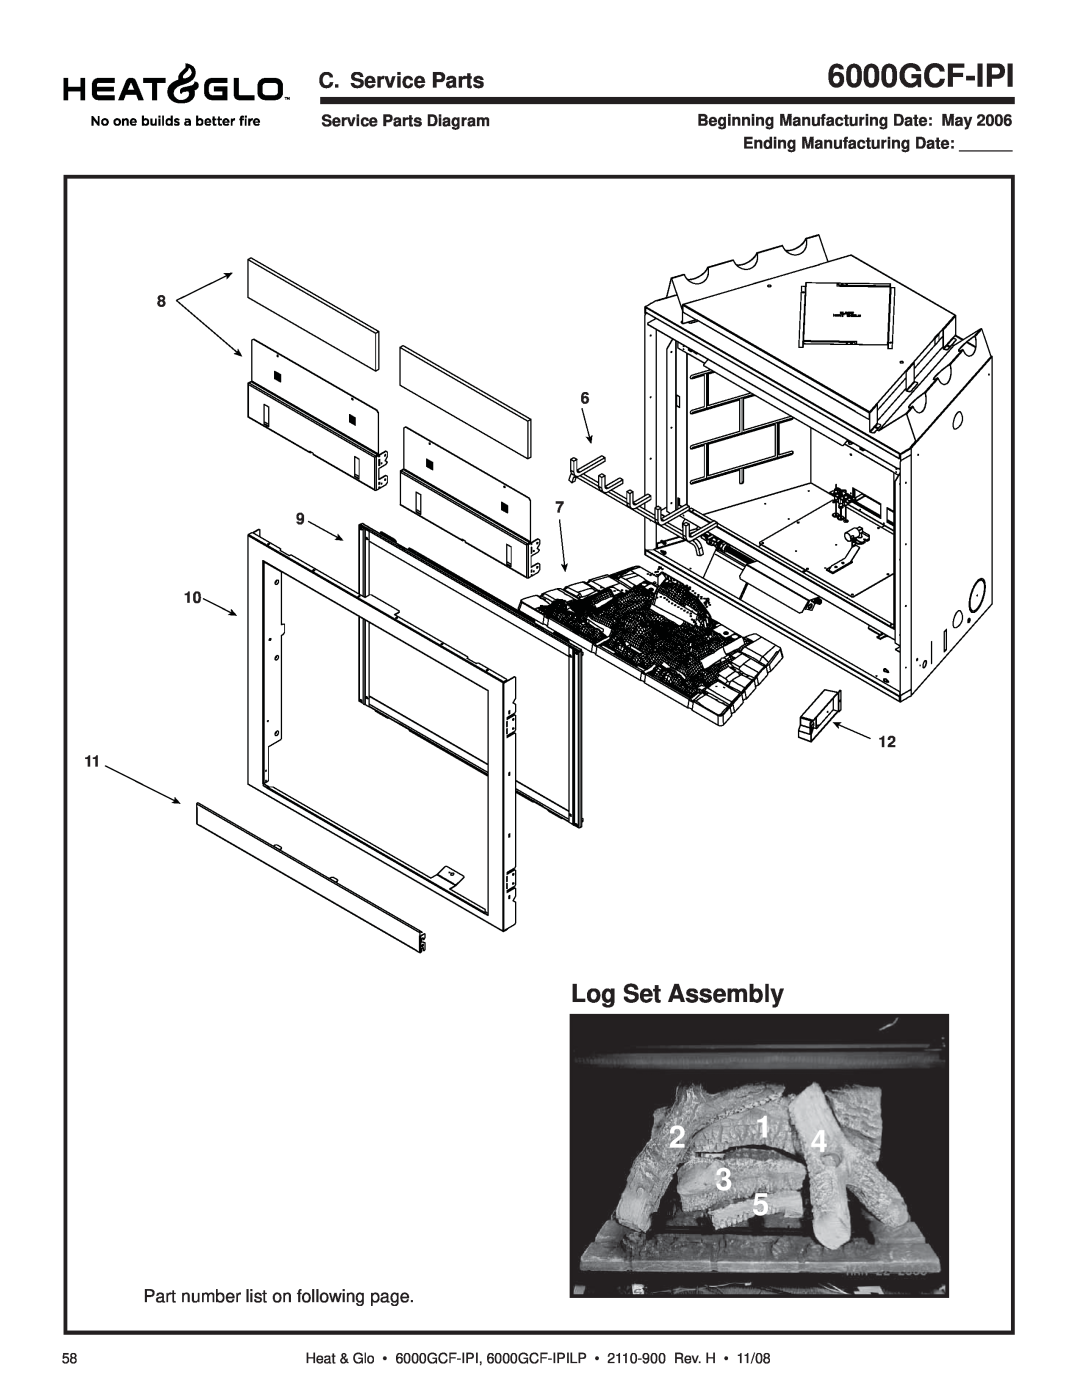 Hearth and Home Technologies 6000GCF-IPIL owner manual Log Set Assembly, C. Service Parts, Service Parts Diagram 